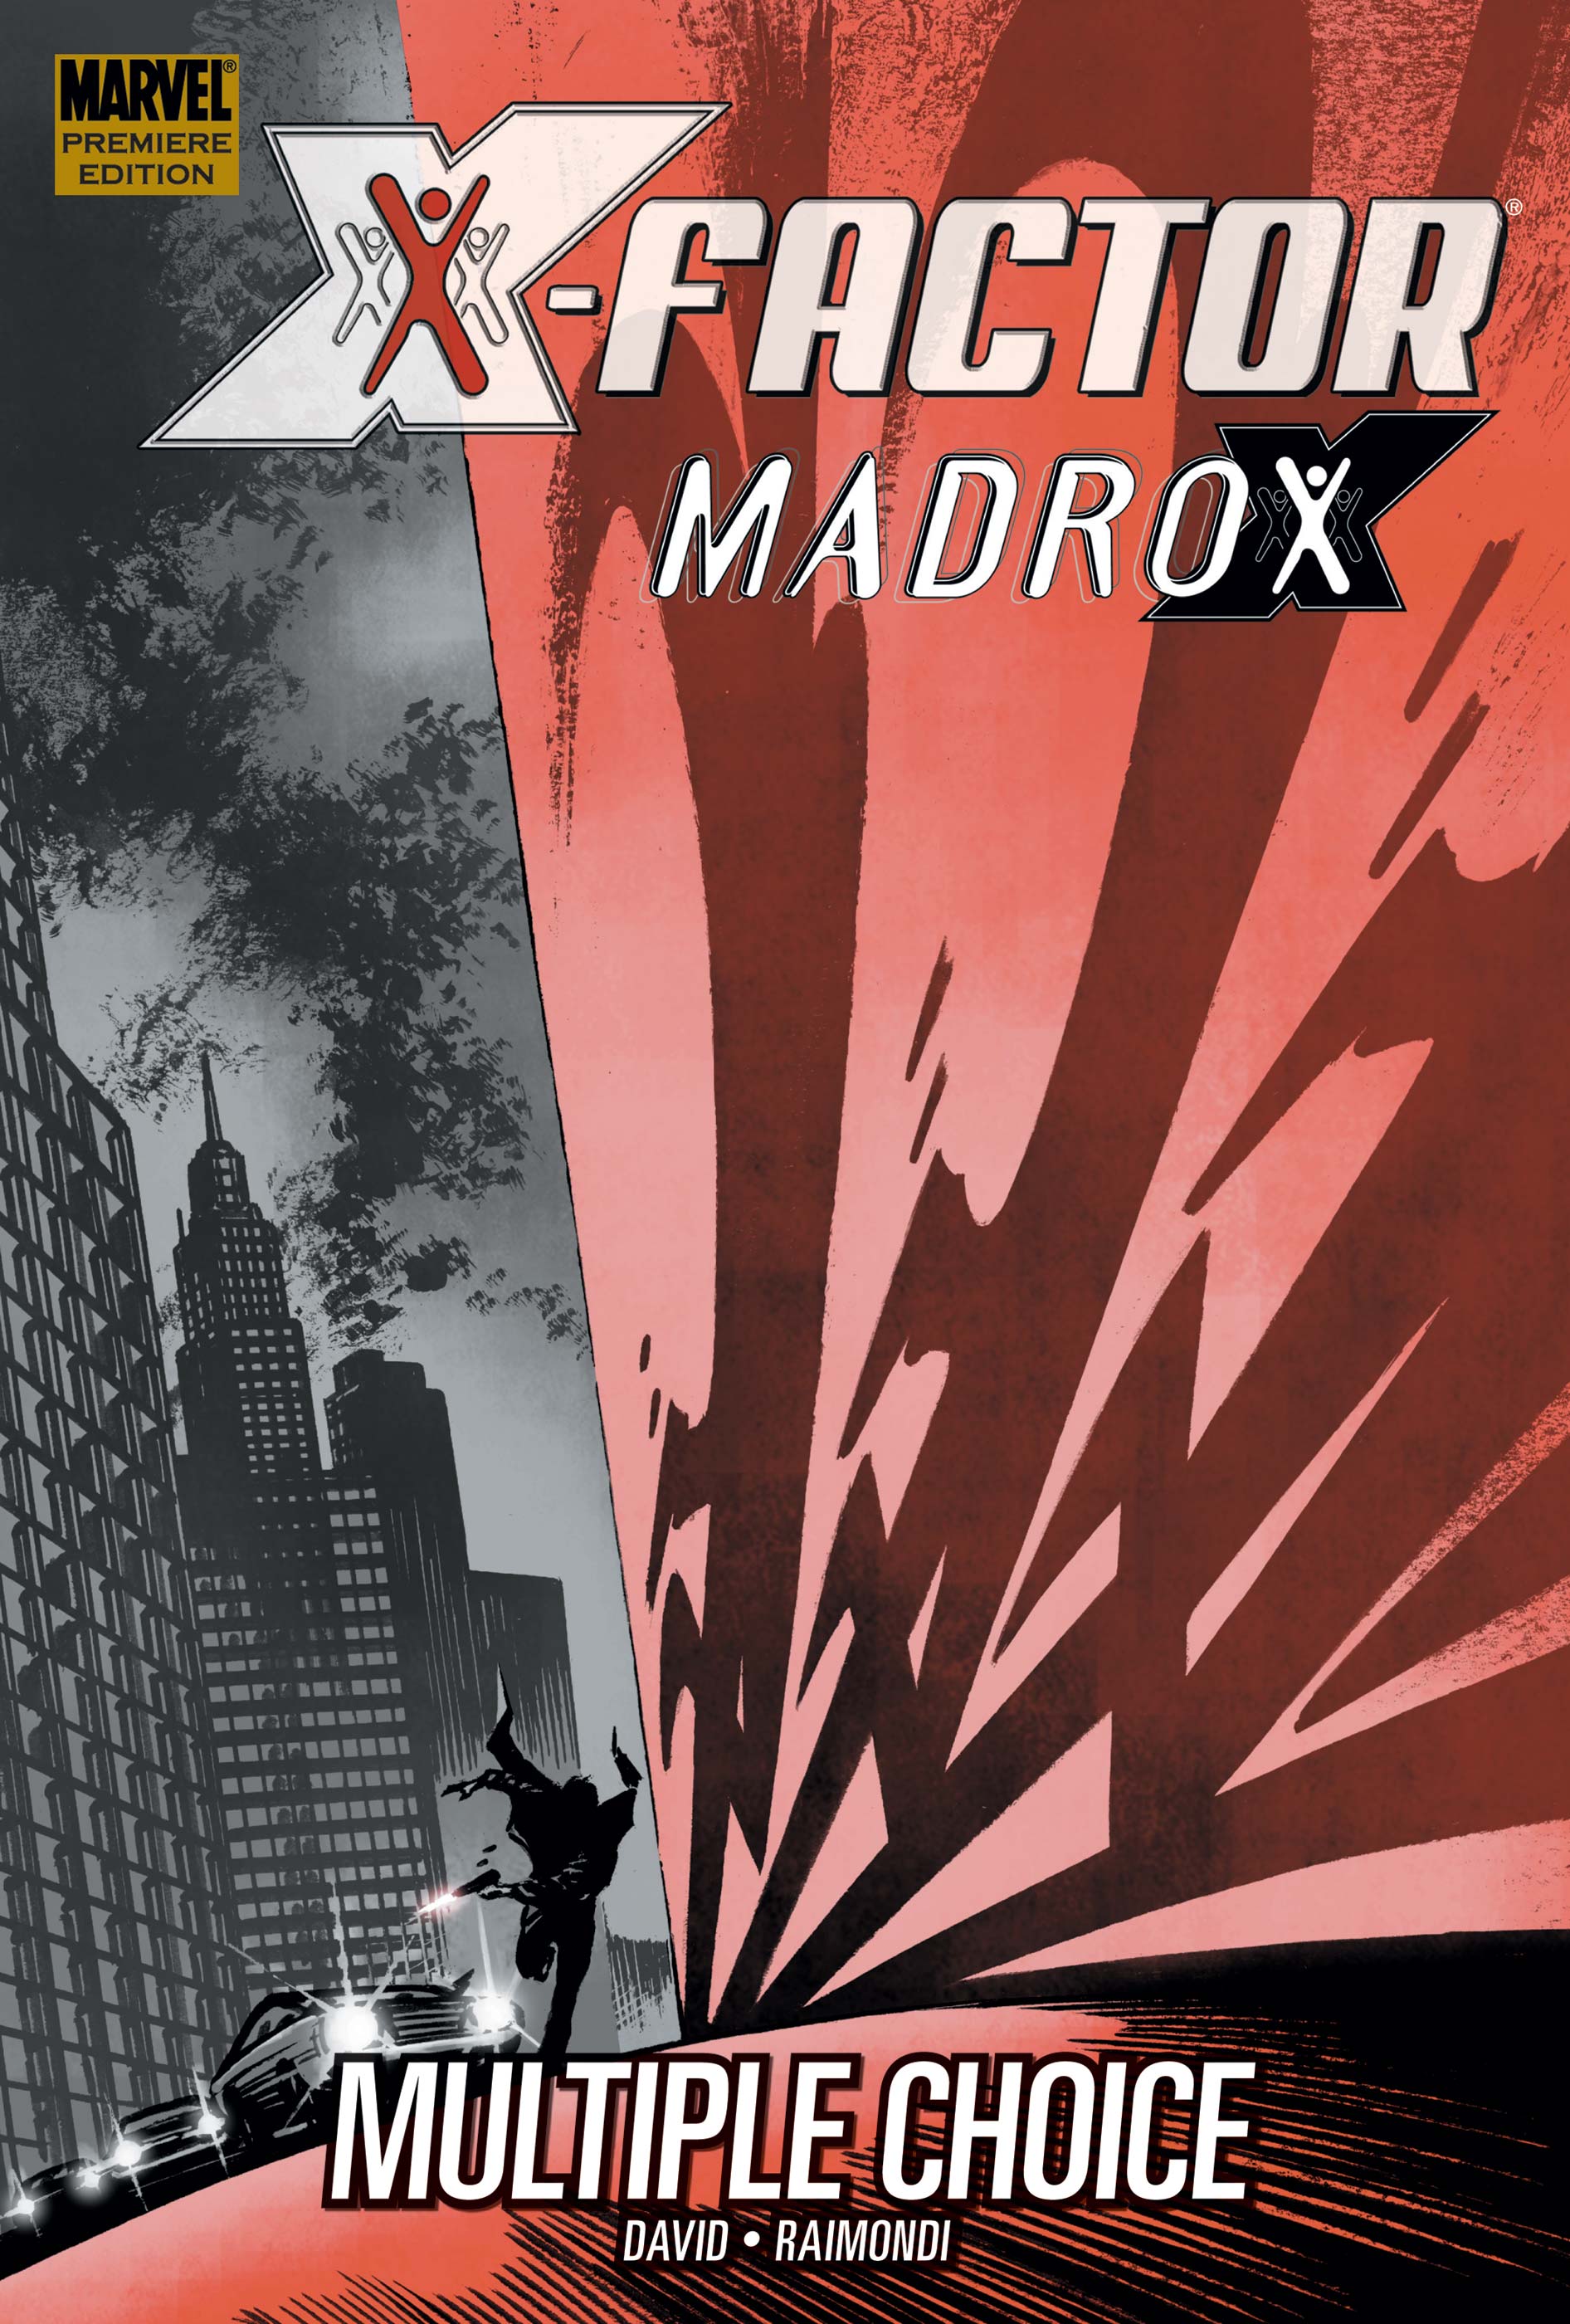 X-Factor: Madrox ­ Multiple Choice Premiere (Hardcover)